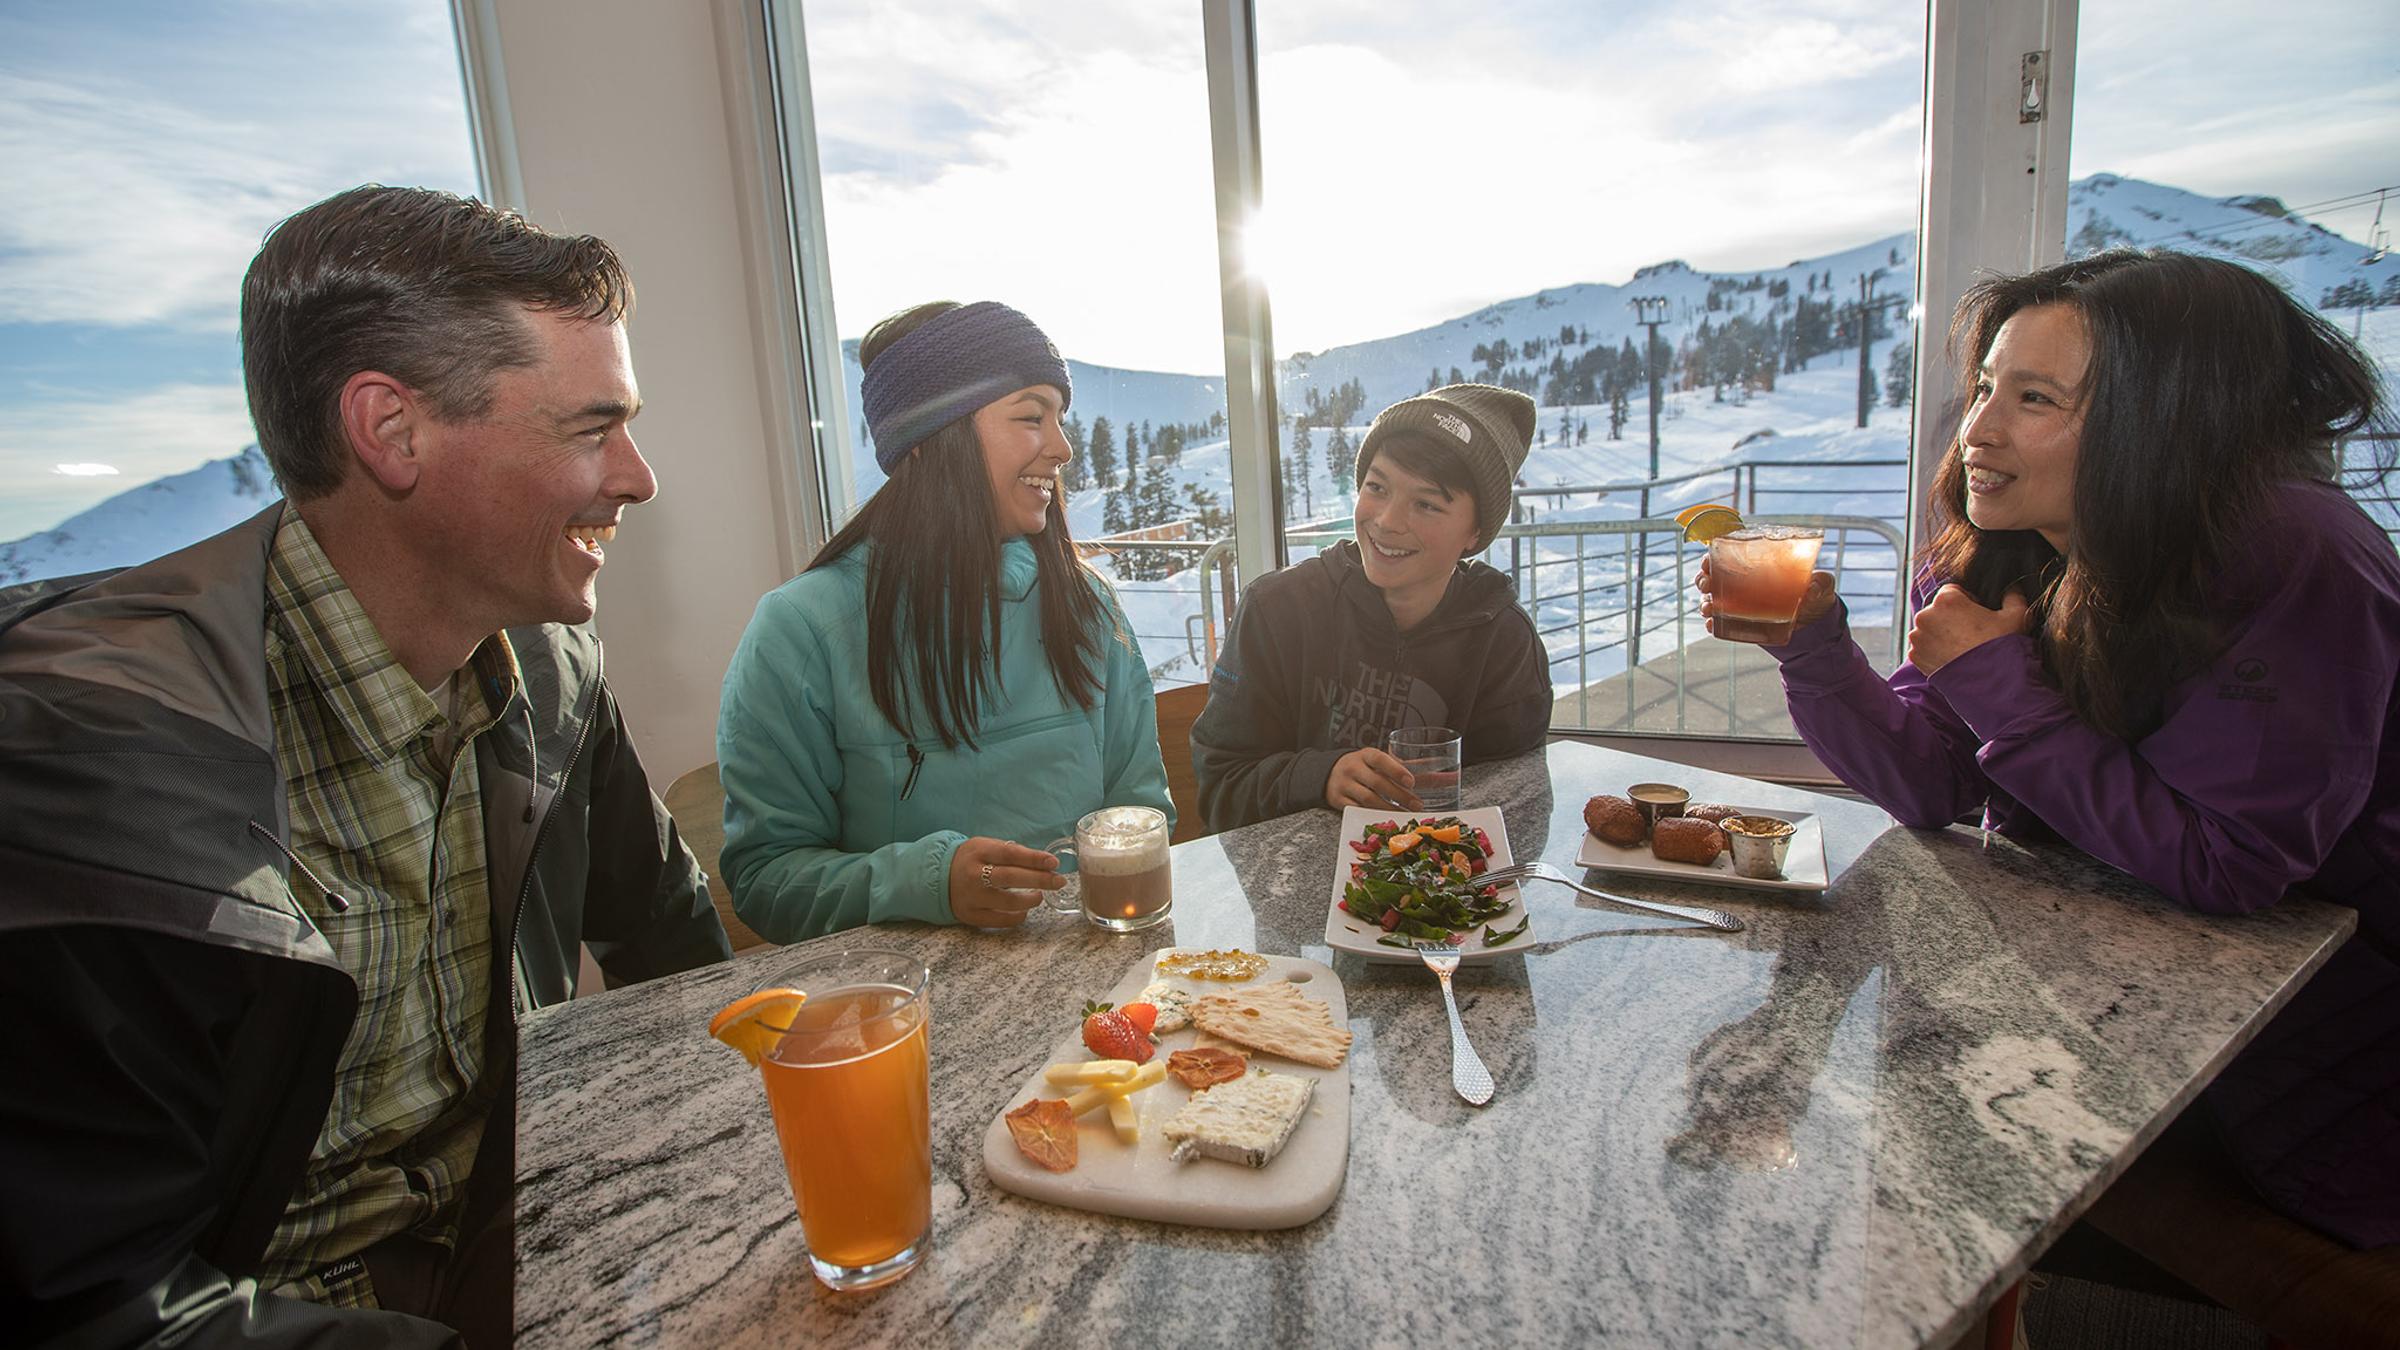 A family enjoys a meal during sunset at Granite Bistro at Squaw Valley's High Camp.